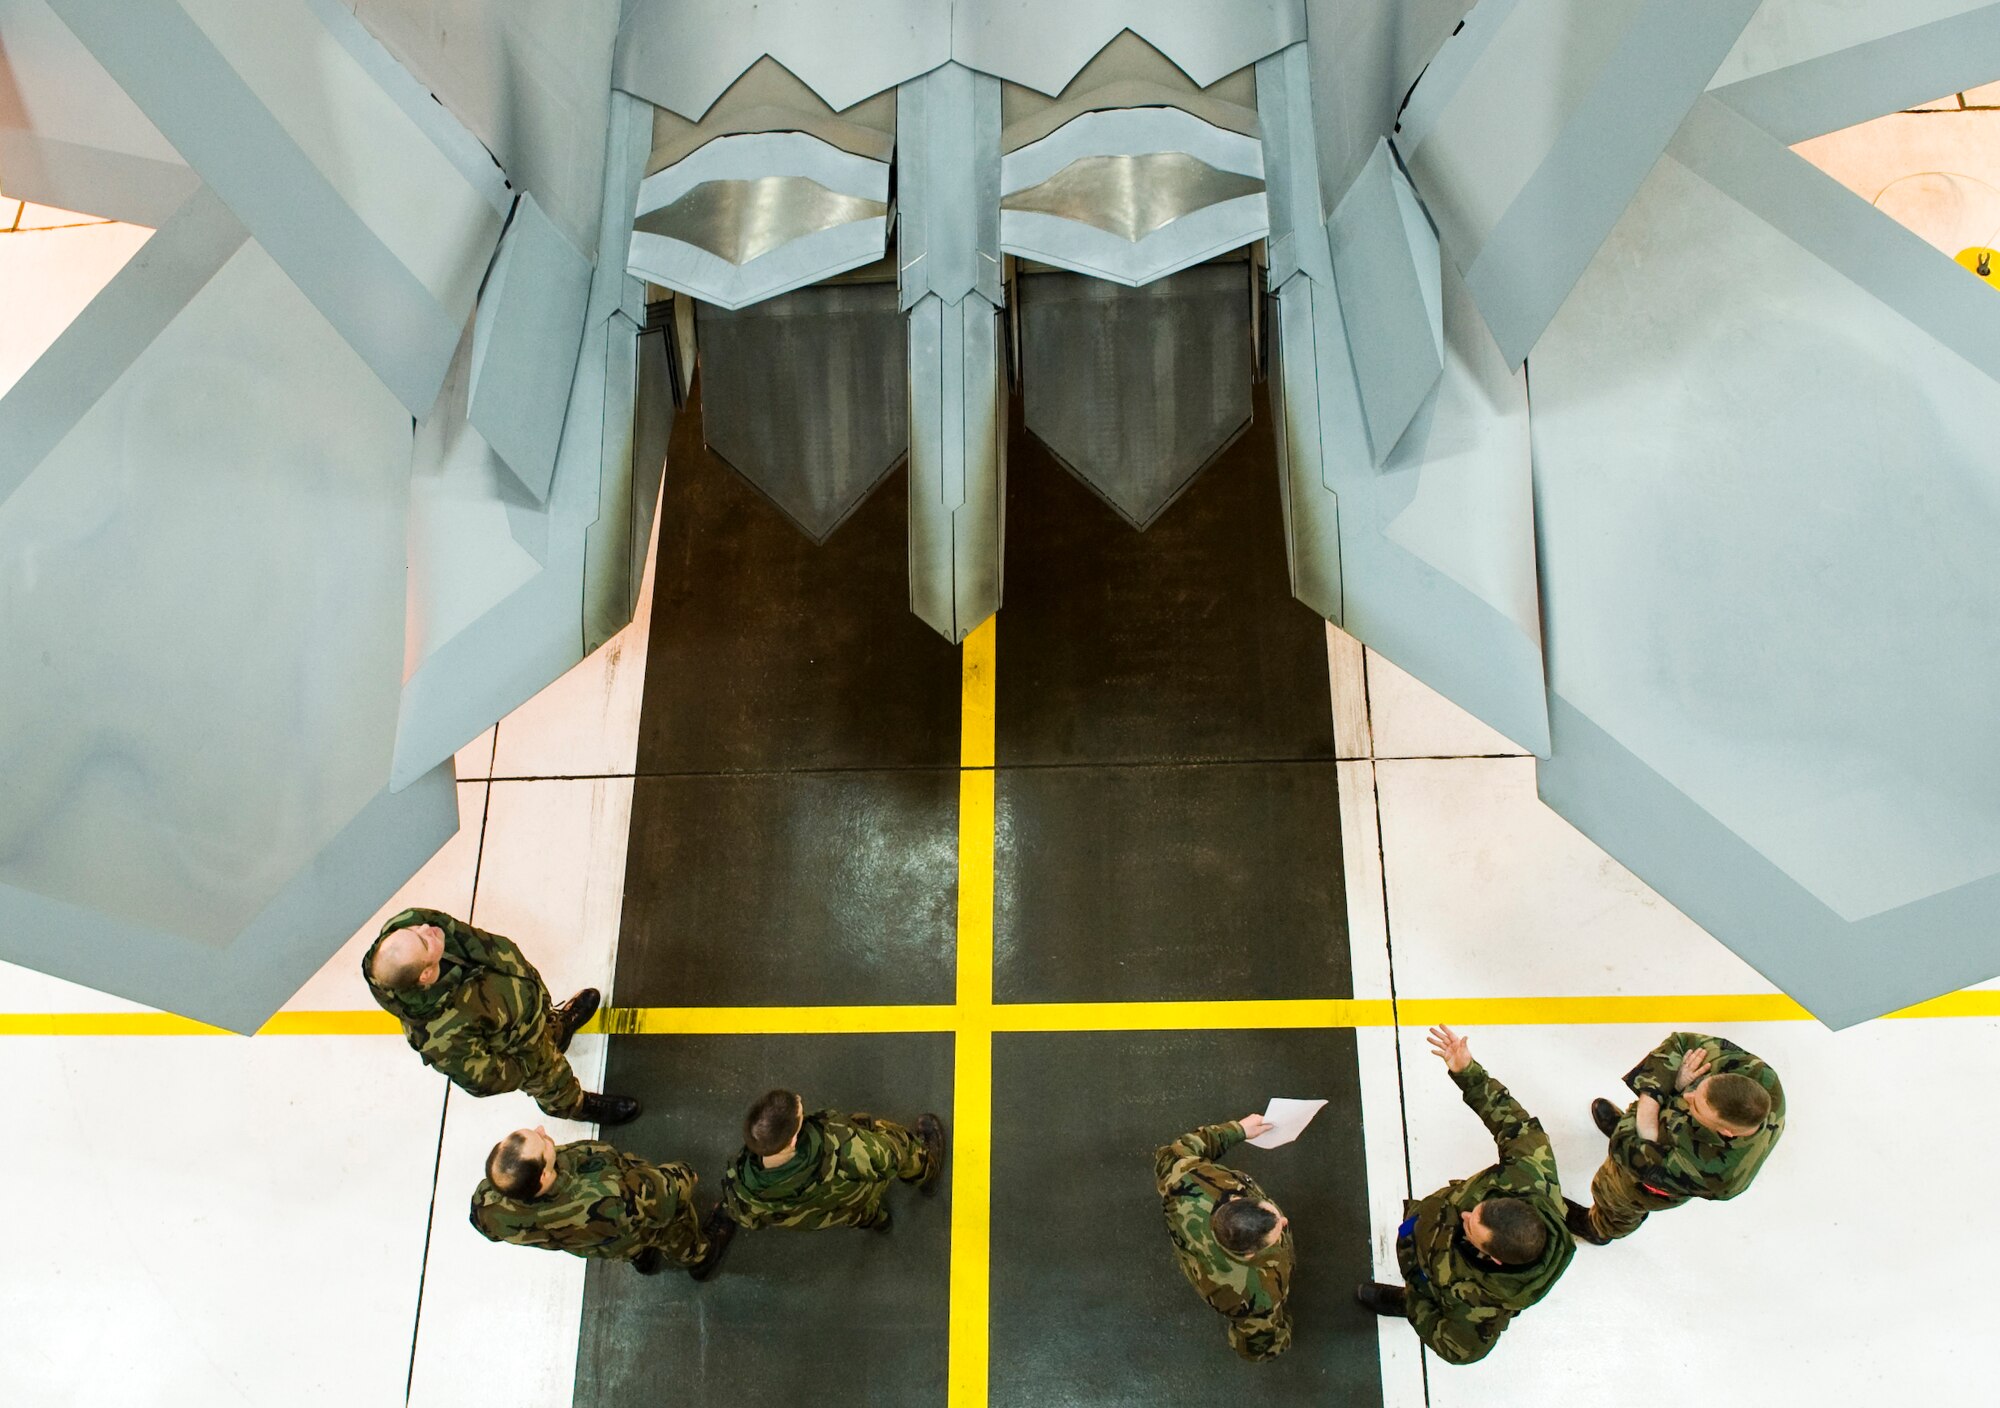 Airmen from the Alaska Air National Guard's 176th Wing at Kulis Air National Guard Base, Alaska, receive training from 477th Aircraft Maintenance Squadron crew chiefs at Elmendorf Air Force Base, Alaska.  The Reservists were training the Air Guardsmen on launch and recovery procedures for an F-22 Raptor in case an aircraft might be  diverted to the nearby Air Guard base. (U.S. Air Force photo/Senior Airman Garrett Hothan)